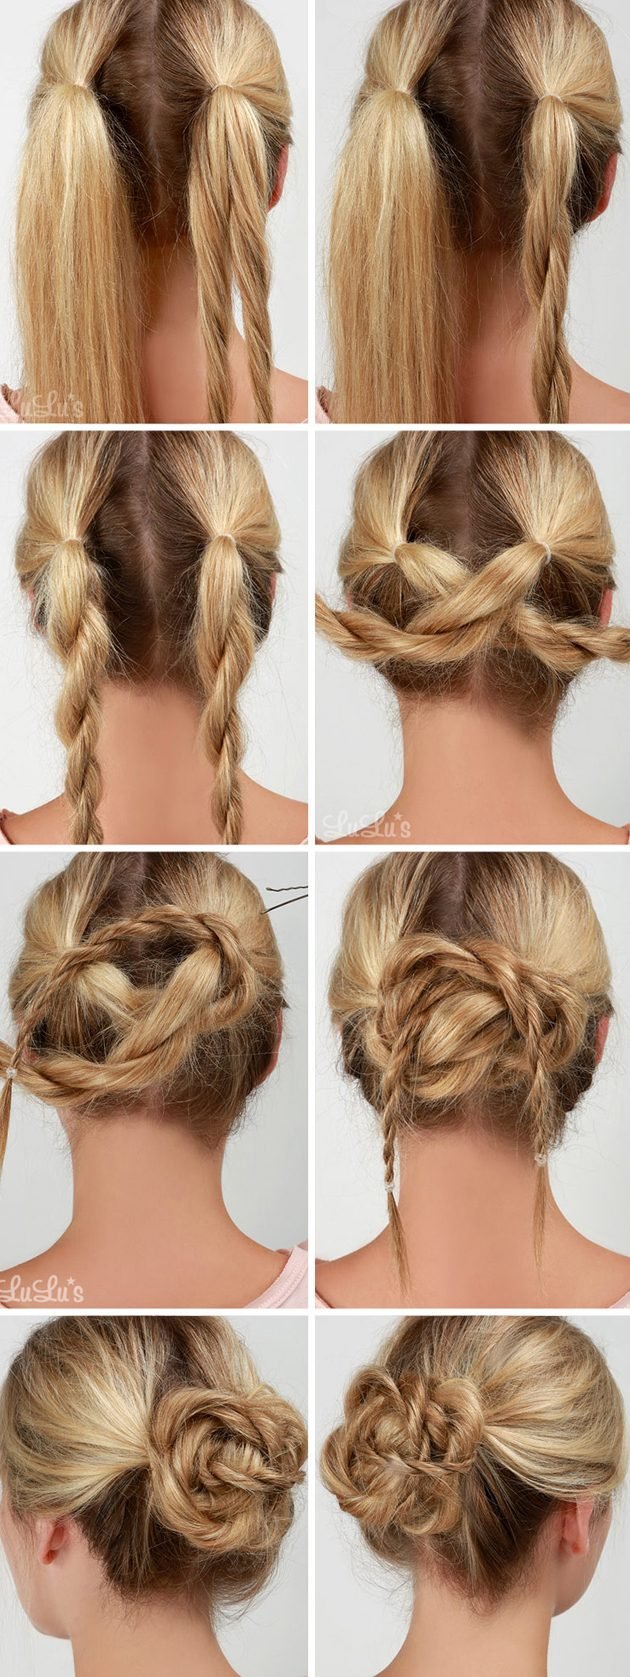 Hairstyles in 5 minutes: a knot of bundles